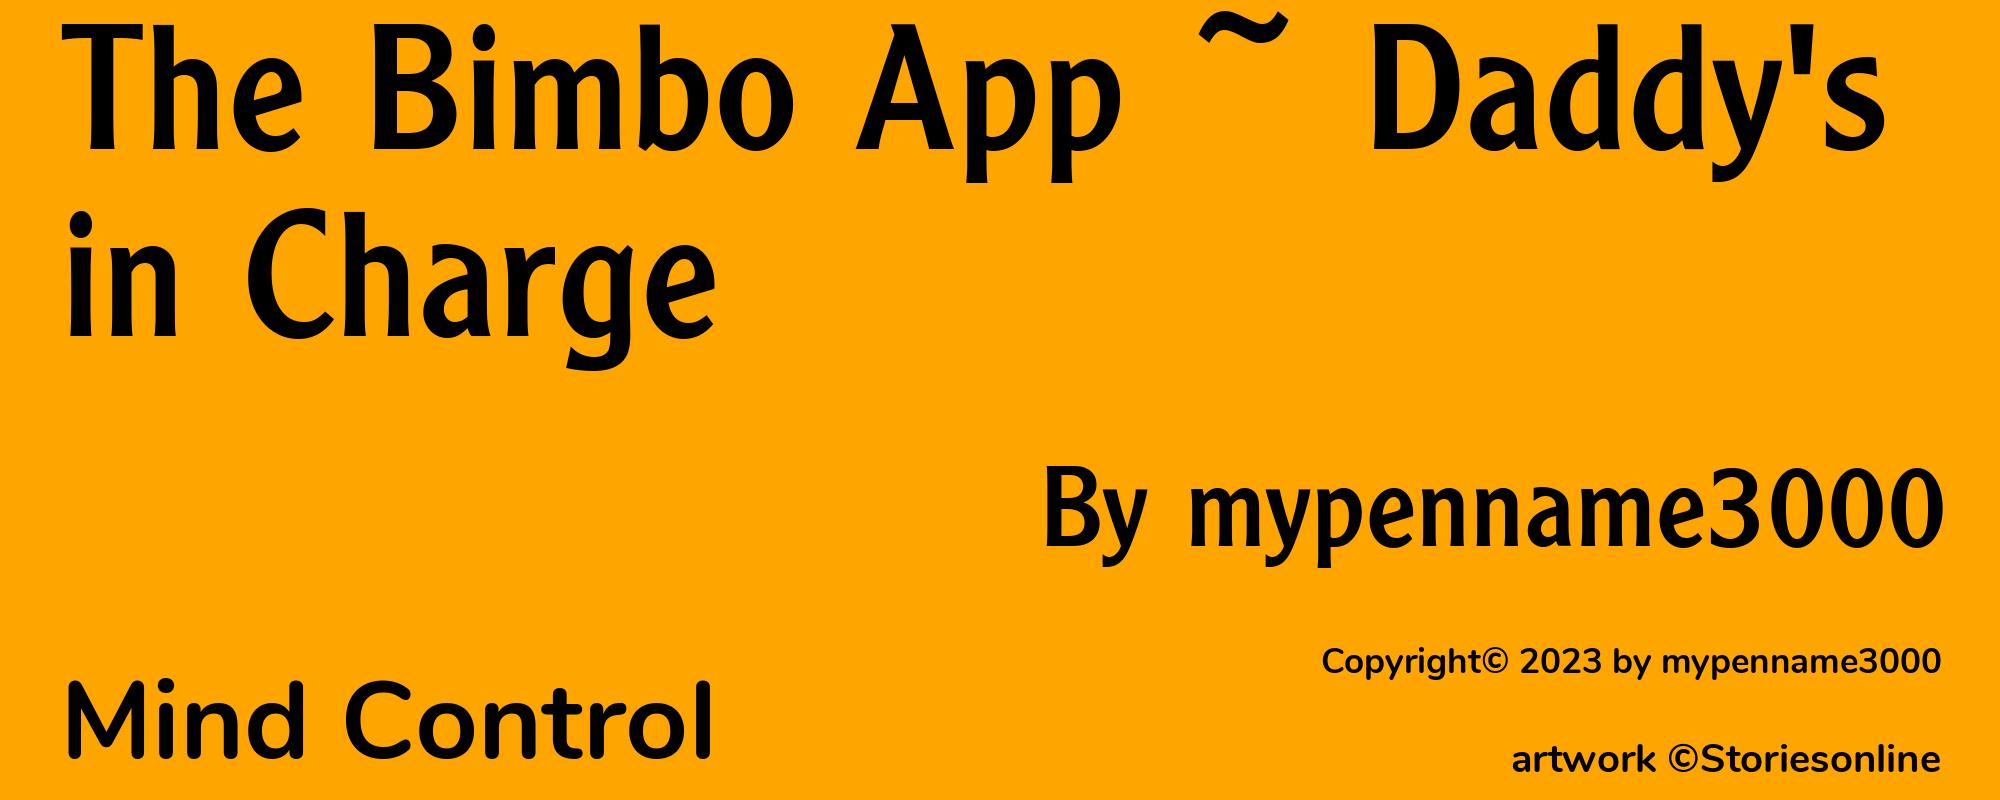 The Bimbo App ~ Daddy's in Charge - Cover